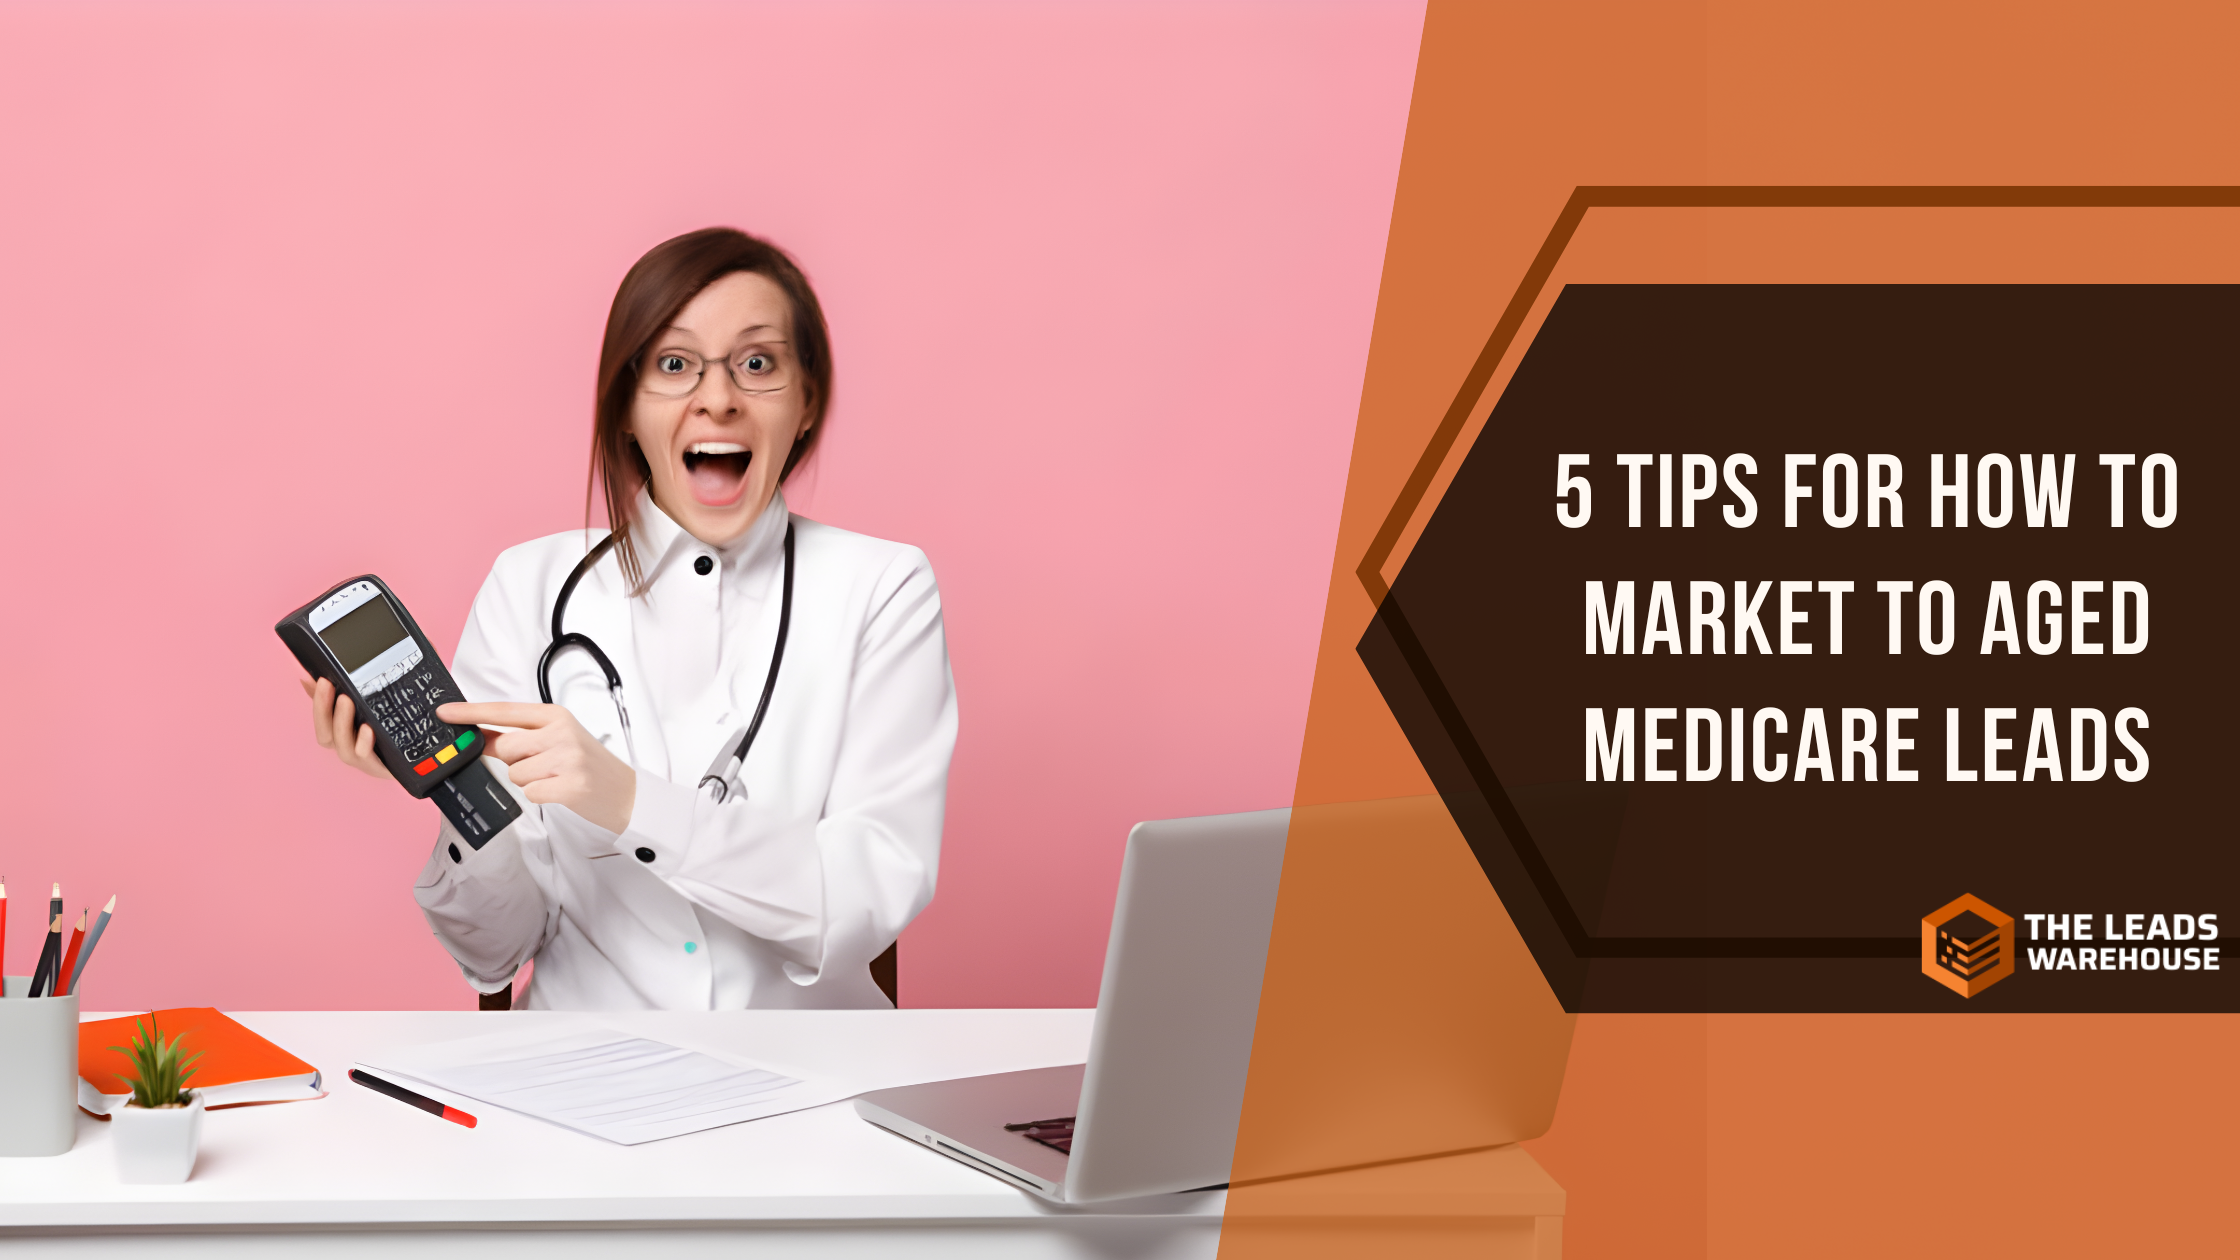 Market To Aged Medicare Leads | 5 Tips